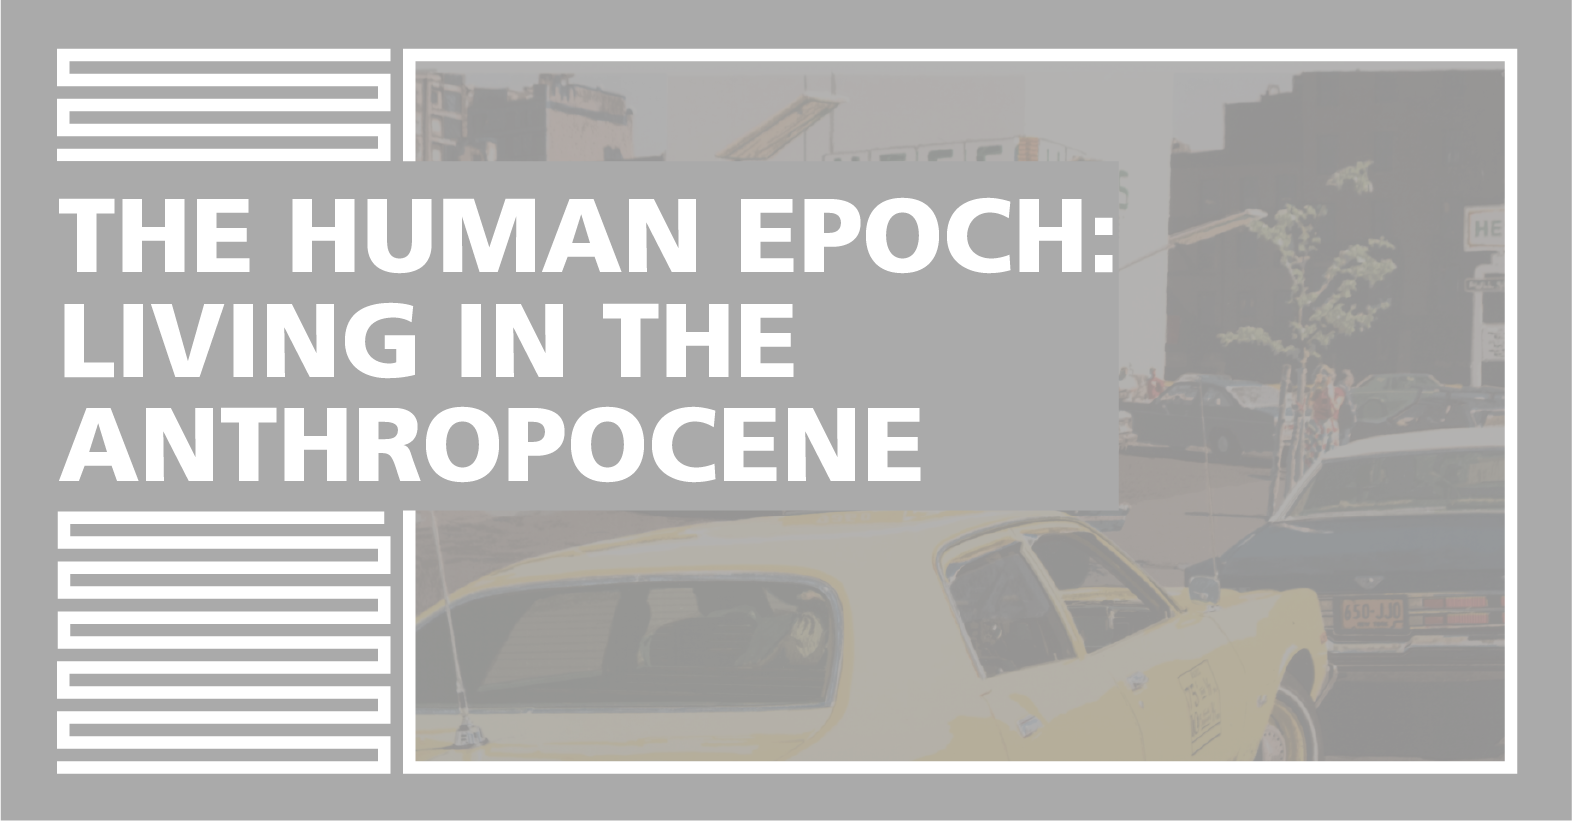 Cover Image for "The Human Epoch: Living in the Anthropocene"